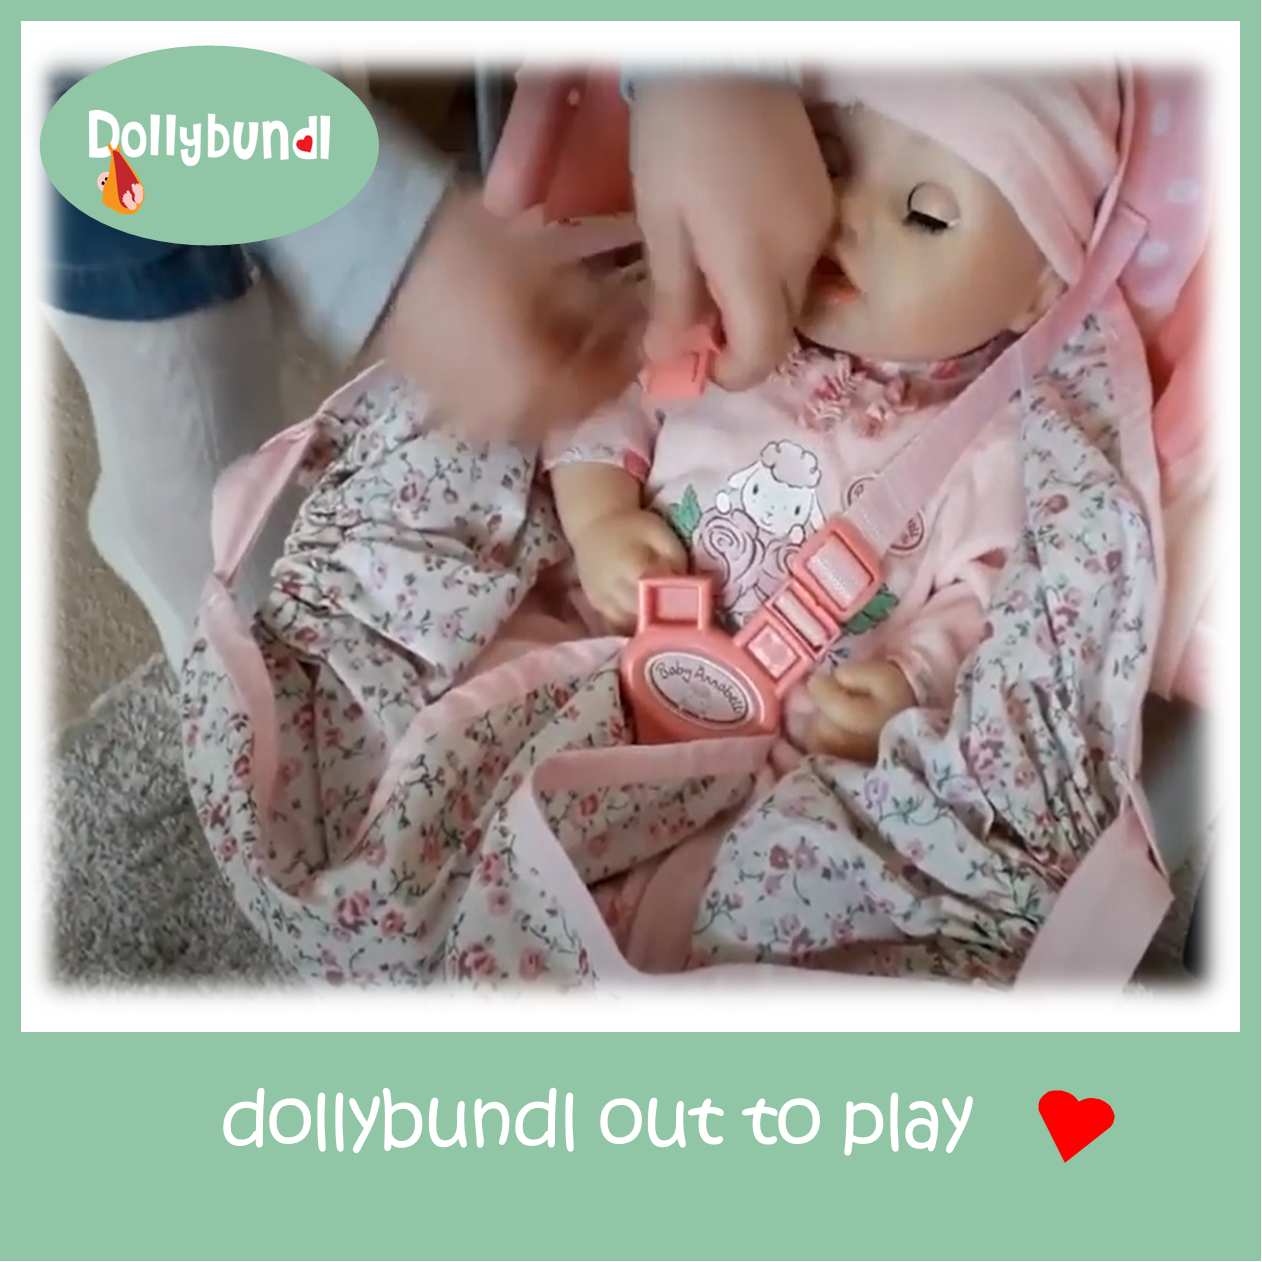 Dollybundl - The Toy Dollybundl for Dollies and Teddys     * SORRY BUT THIS PRODUCT IS ONLY AVAILABLE IN THE UK AND OUT OF STOCK IN THE USA